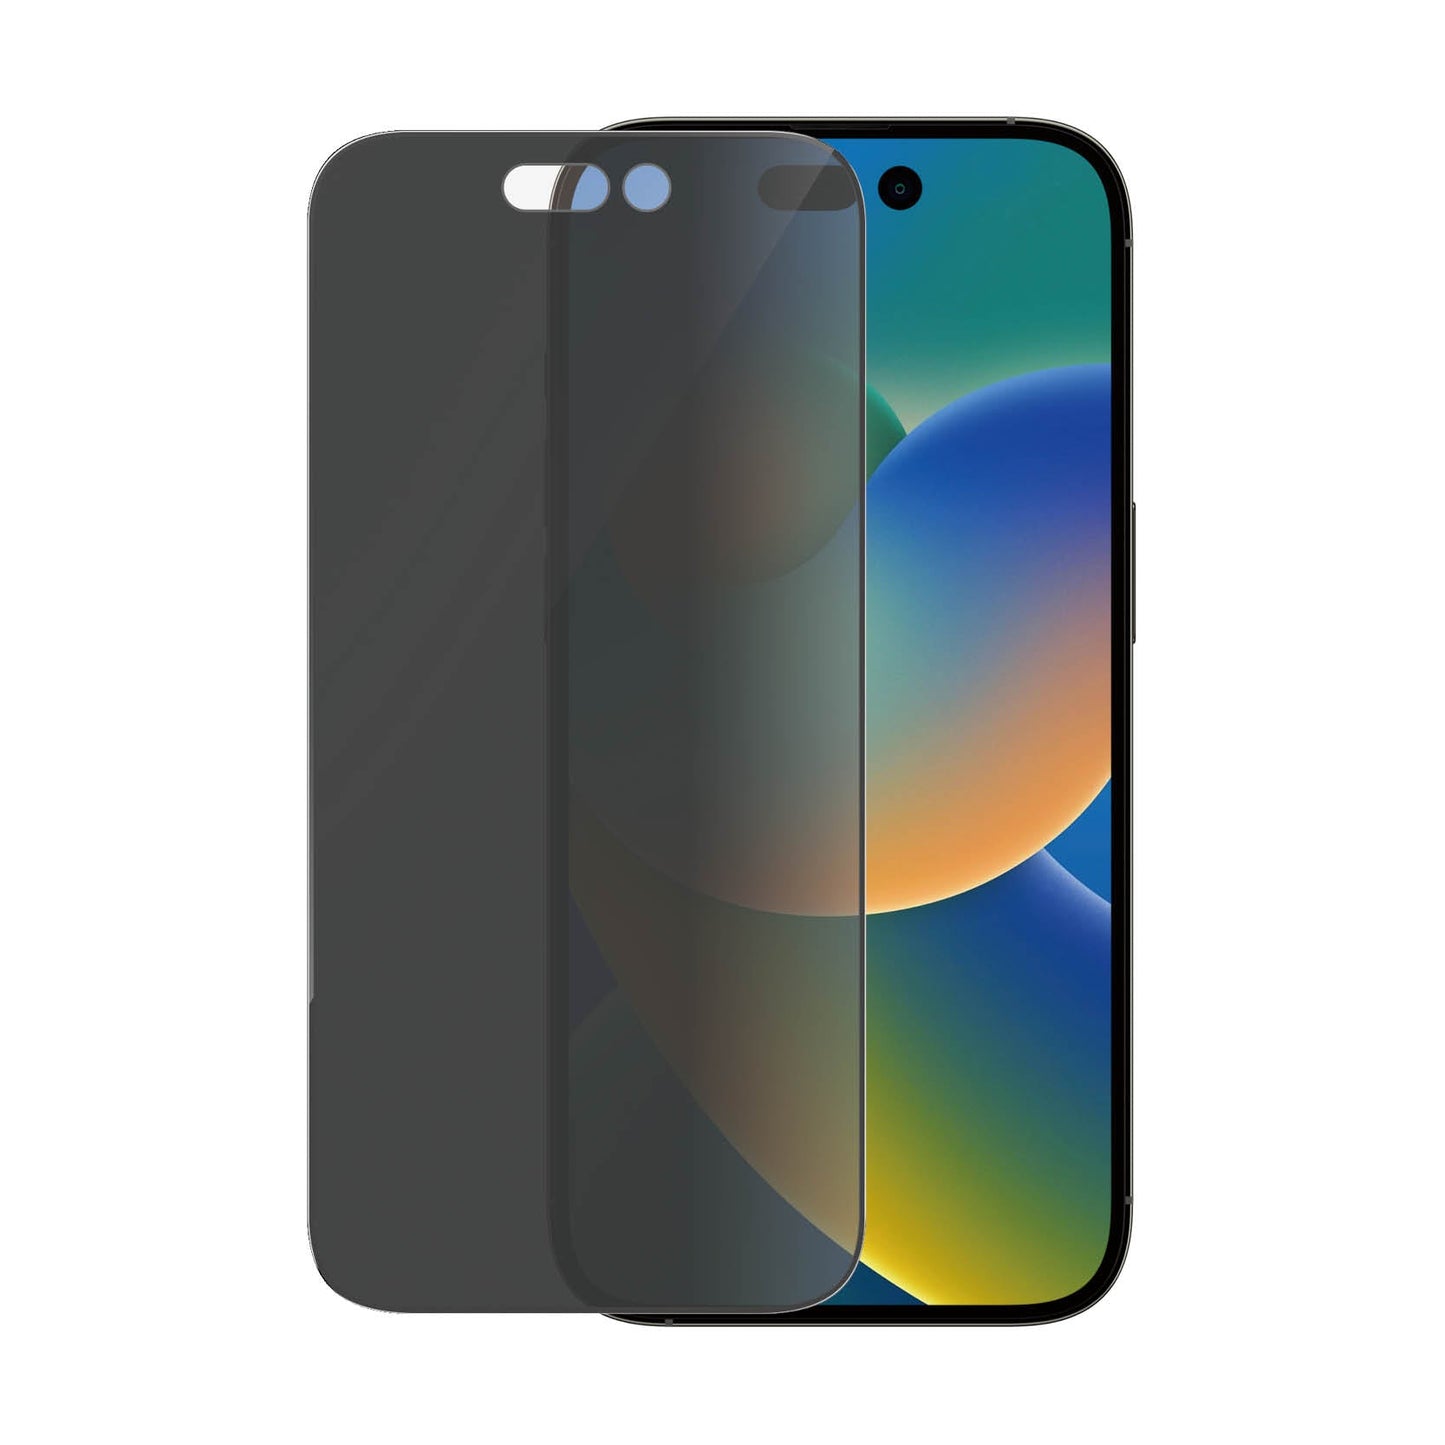 Tempered Glass XIAOMI 13 / 14 PanzerGlass Ultra-Wide Fit Screen Protection, screen protection \ Screen protection \ Tempered Glass screen protection  \ Types of glasses \ Tempered Standard all GSM accessories \ Screen & lens  protection \ For smartphones